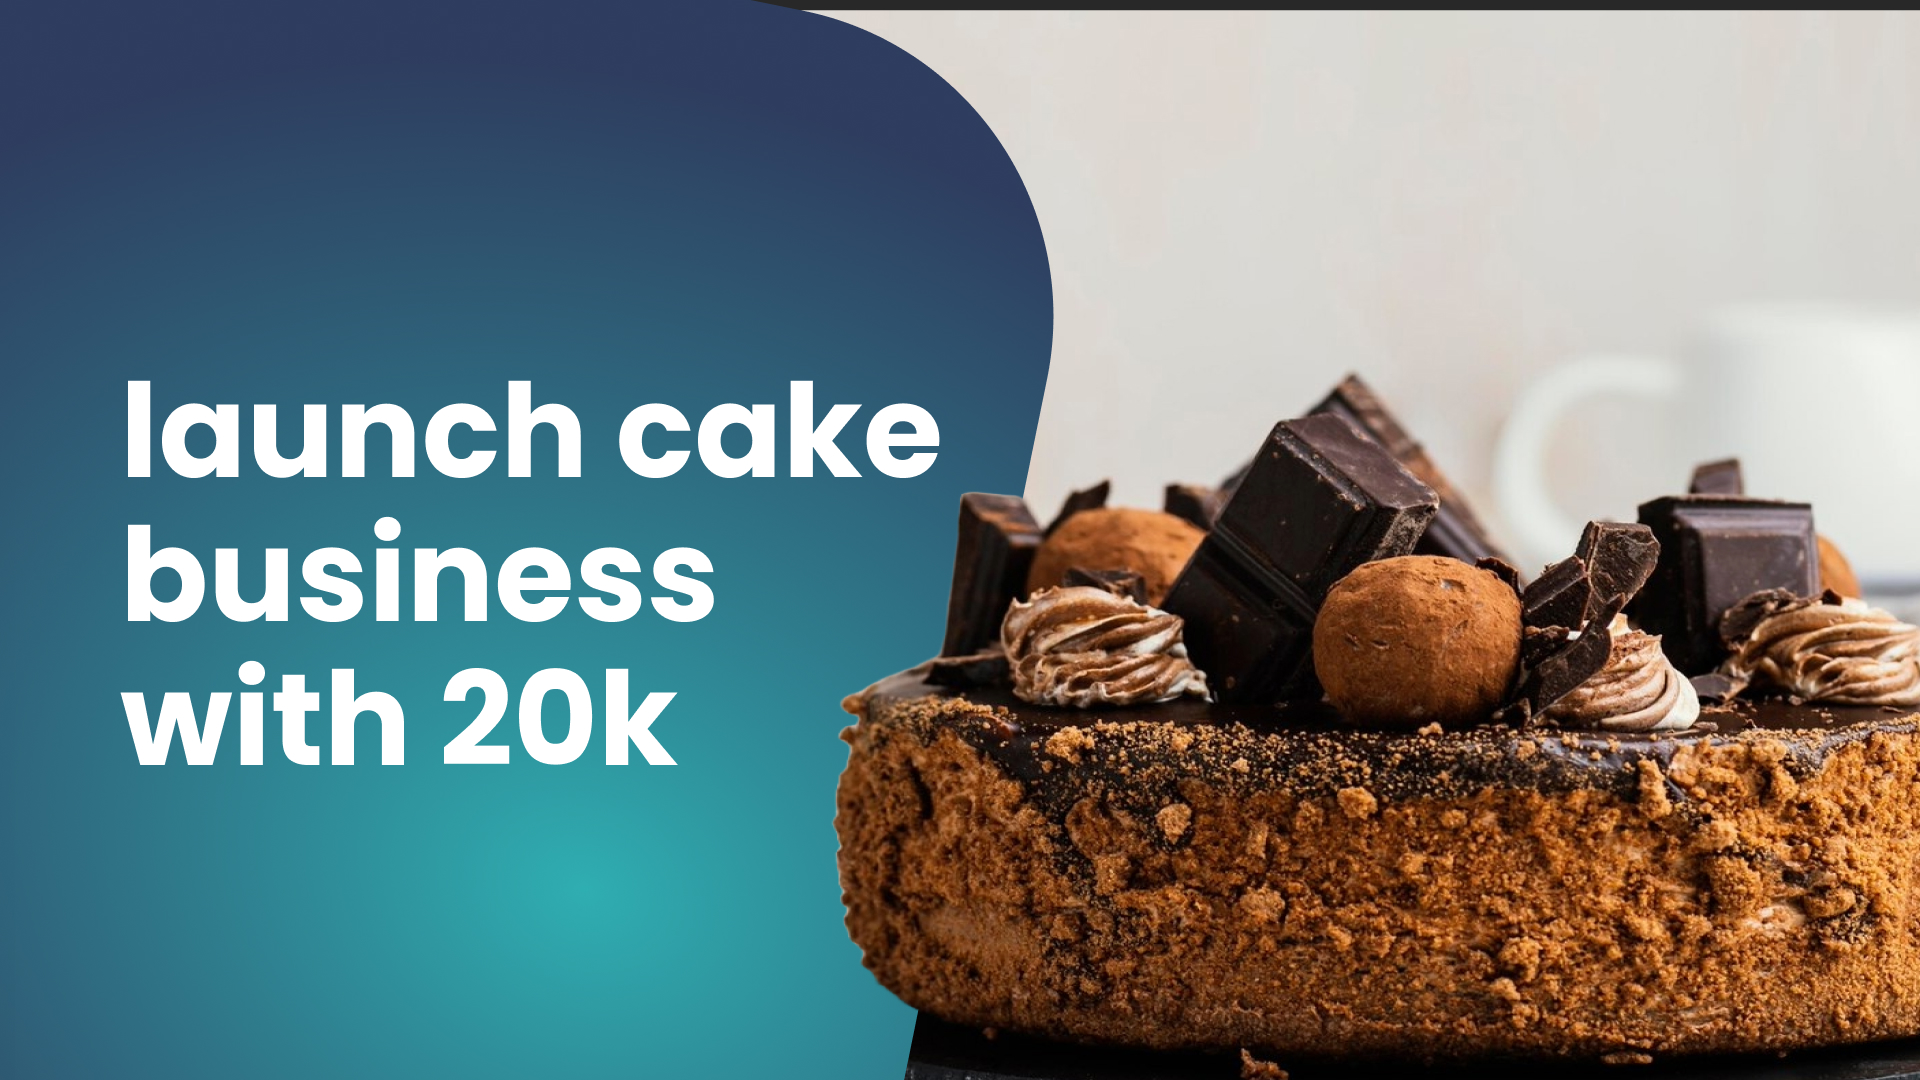 Course Trailer: Cake Making Business From Home - Start with just 20k investment . Watch to know more.